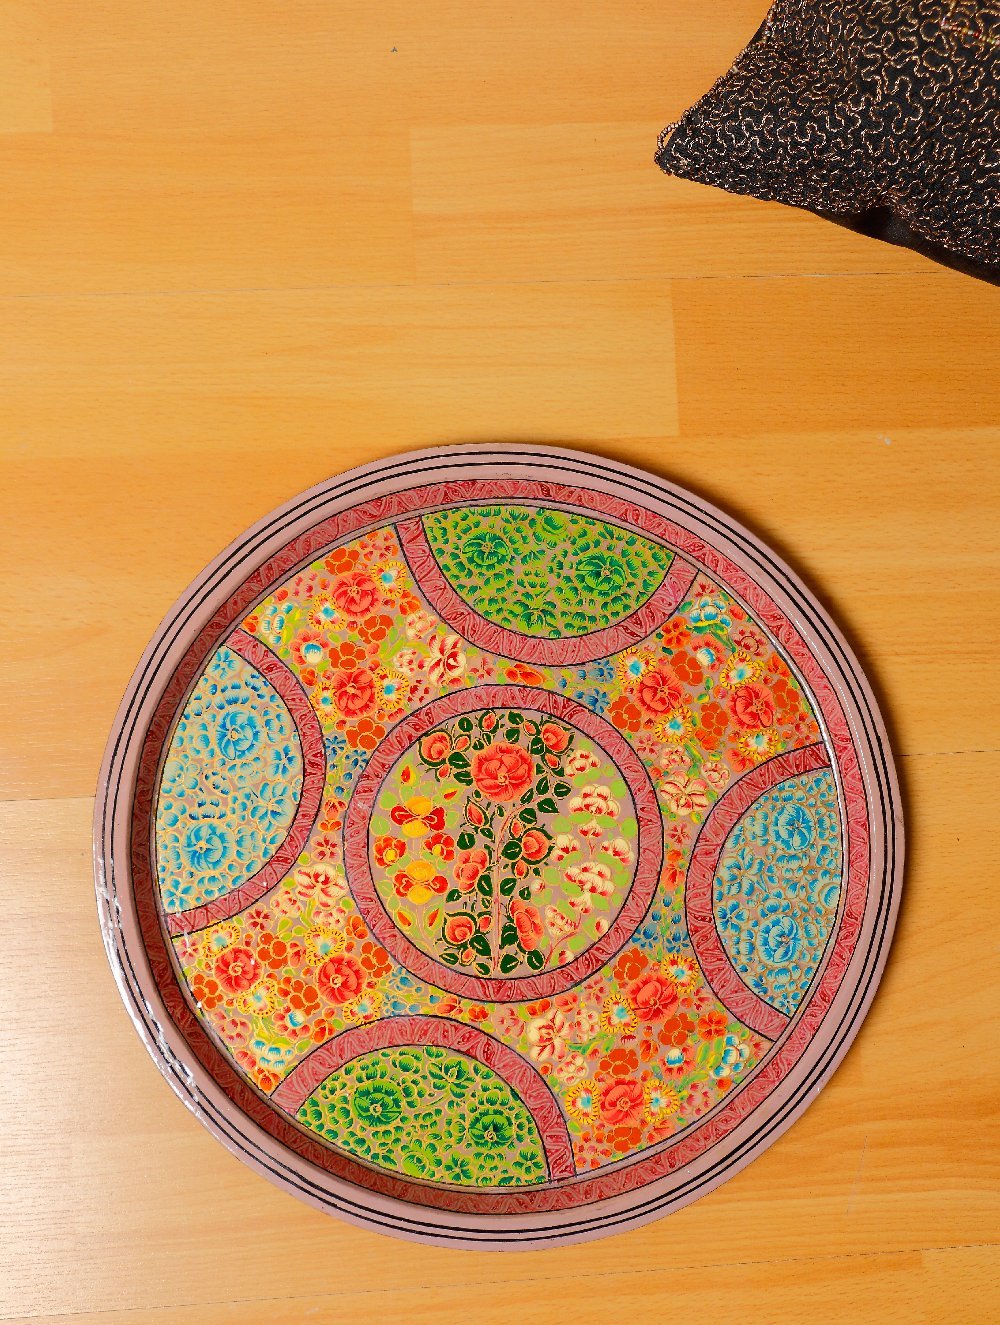 Load image into Gallery viewer, Kashmiri Art - Round Tray - The India Craft House 